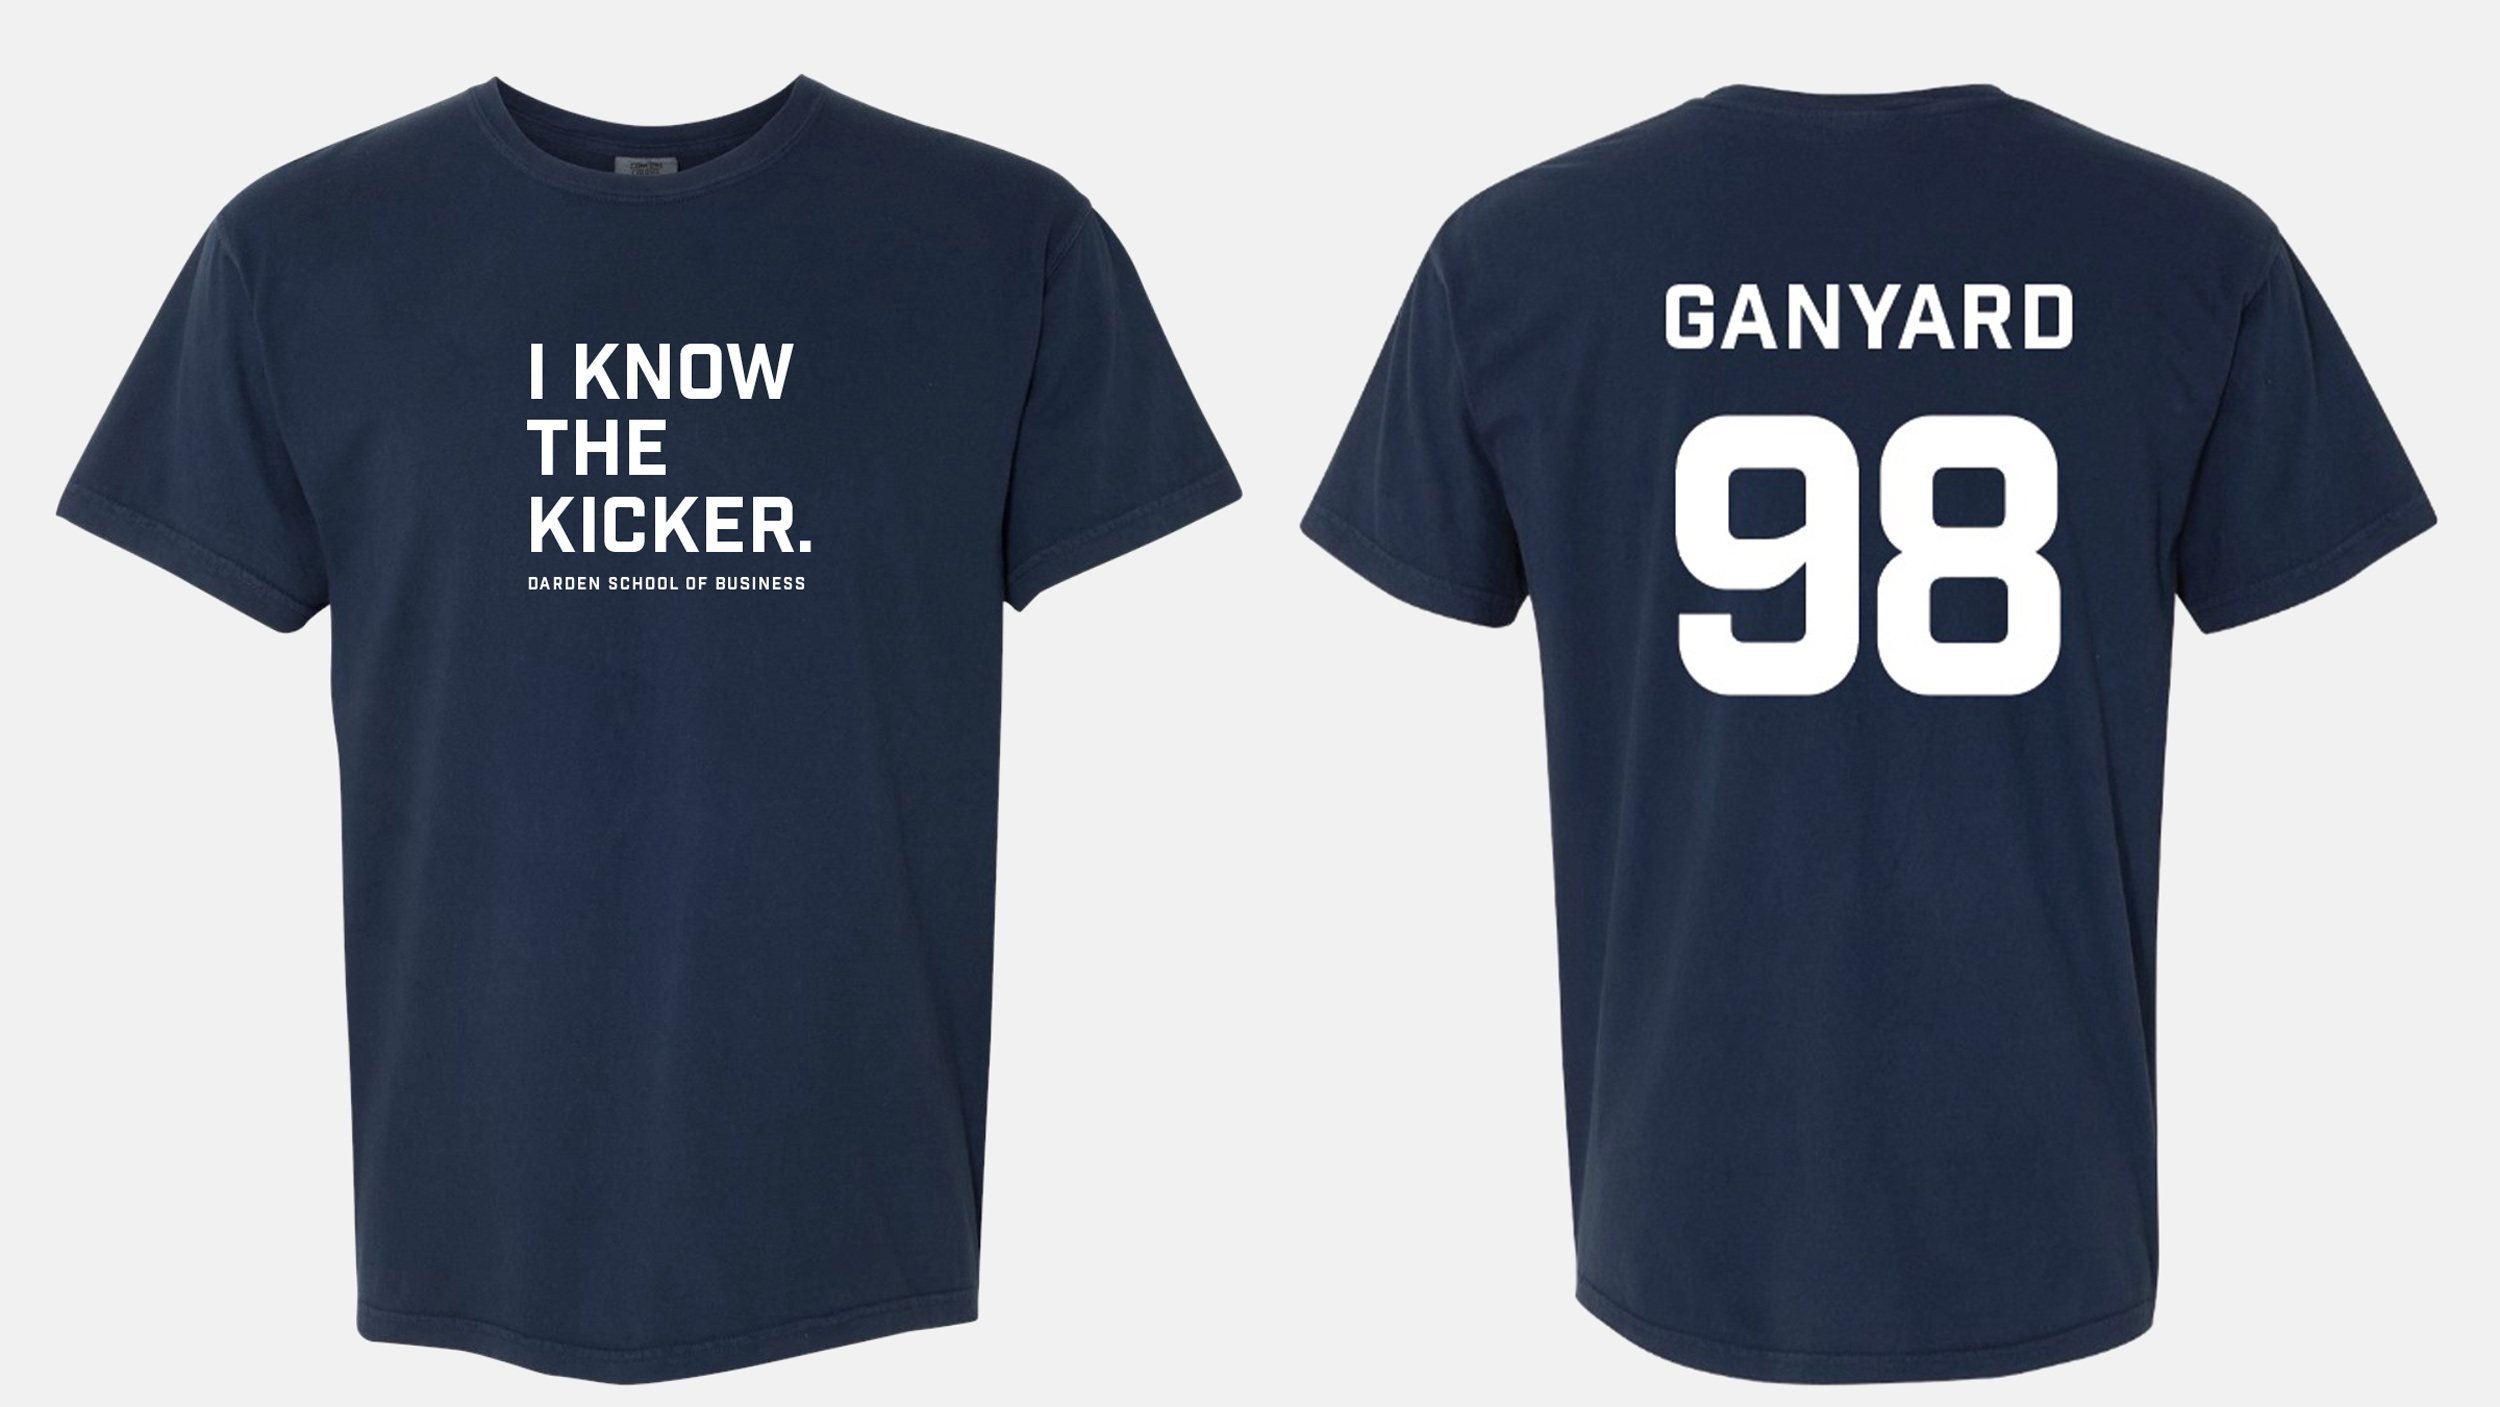 Front and back of a t-shirt created to support Matt Ganyard